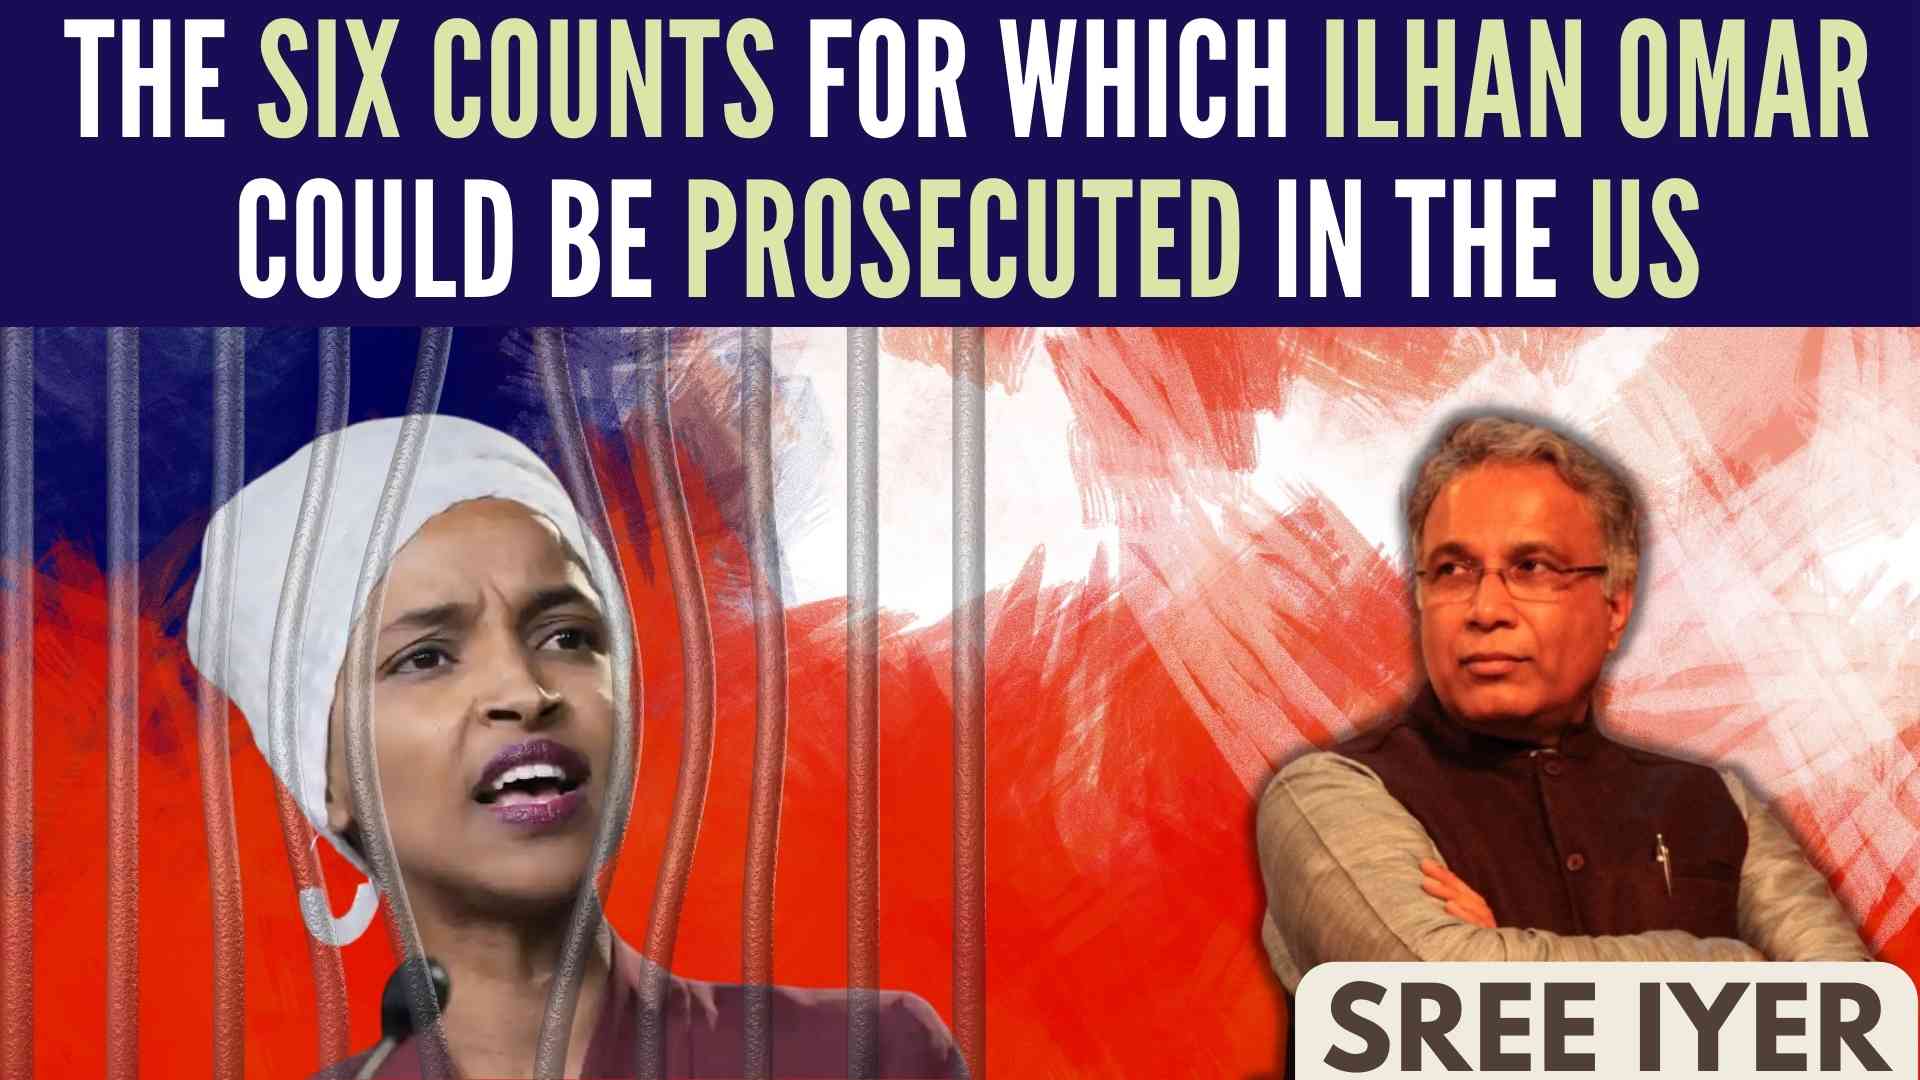 Perjury. Immigration Fraud, Marriage Fraud. Up to eight years of state and federal tax fraud. Two years of Federal Student Loan Fraud, and even Bigamy. These are some of things that Ilhan has been accused of. What is preventing the FBI from moving forward?